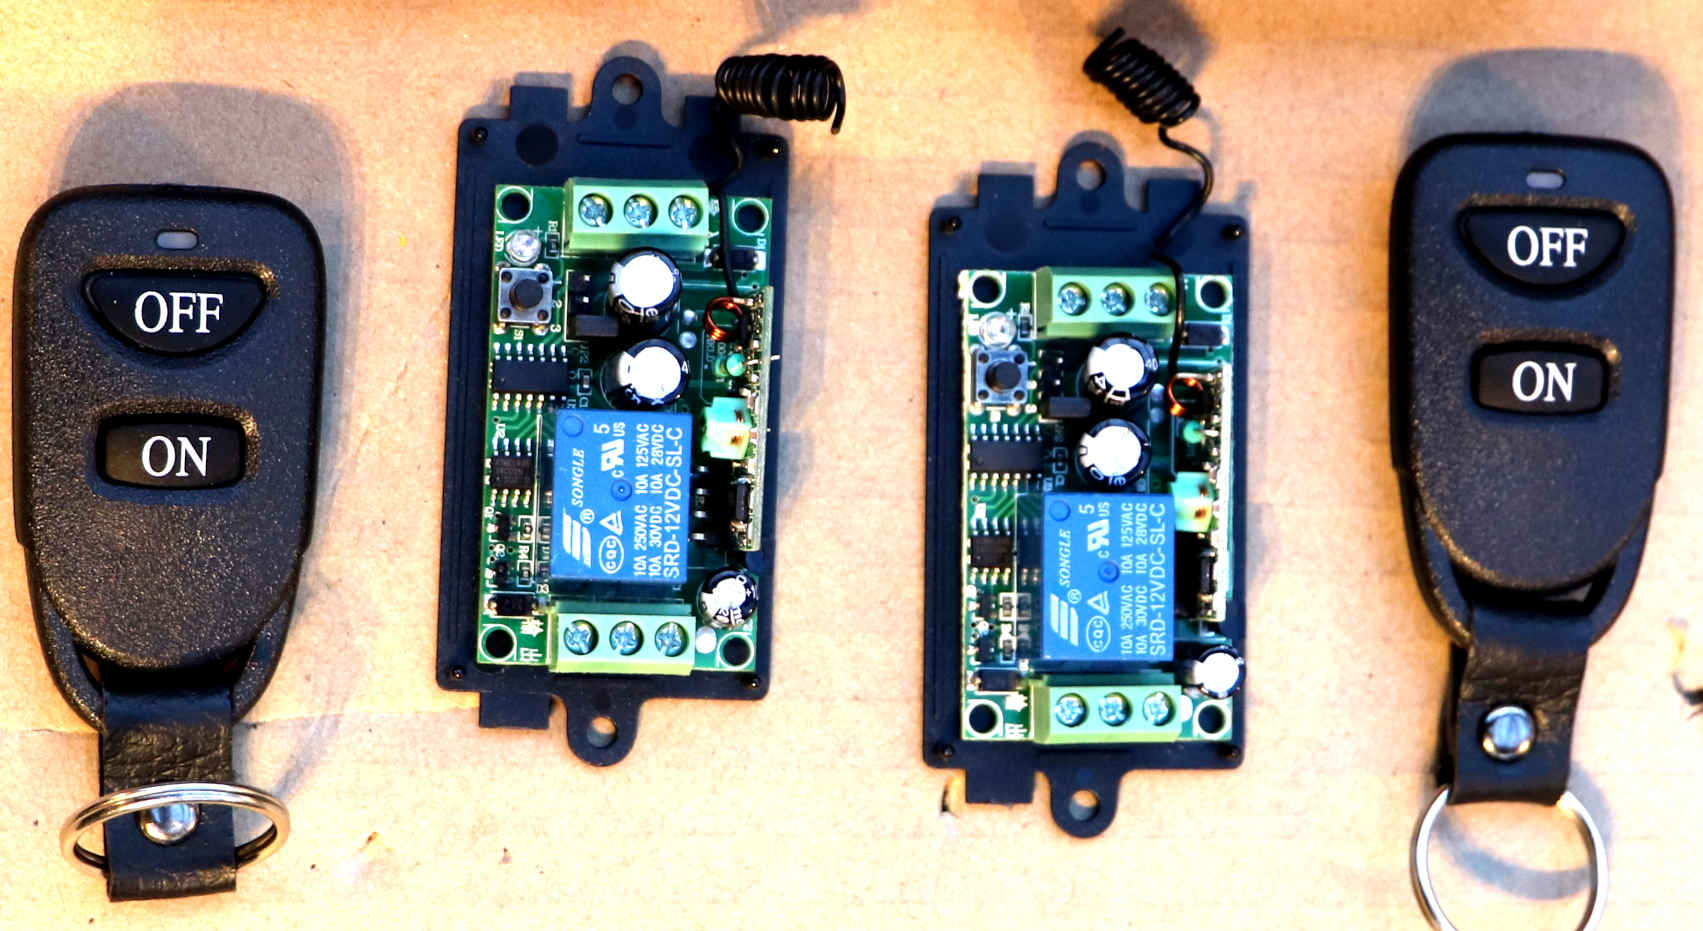 Small radio kill switches, to isolate lithium batteries